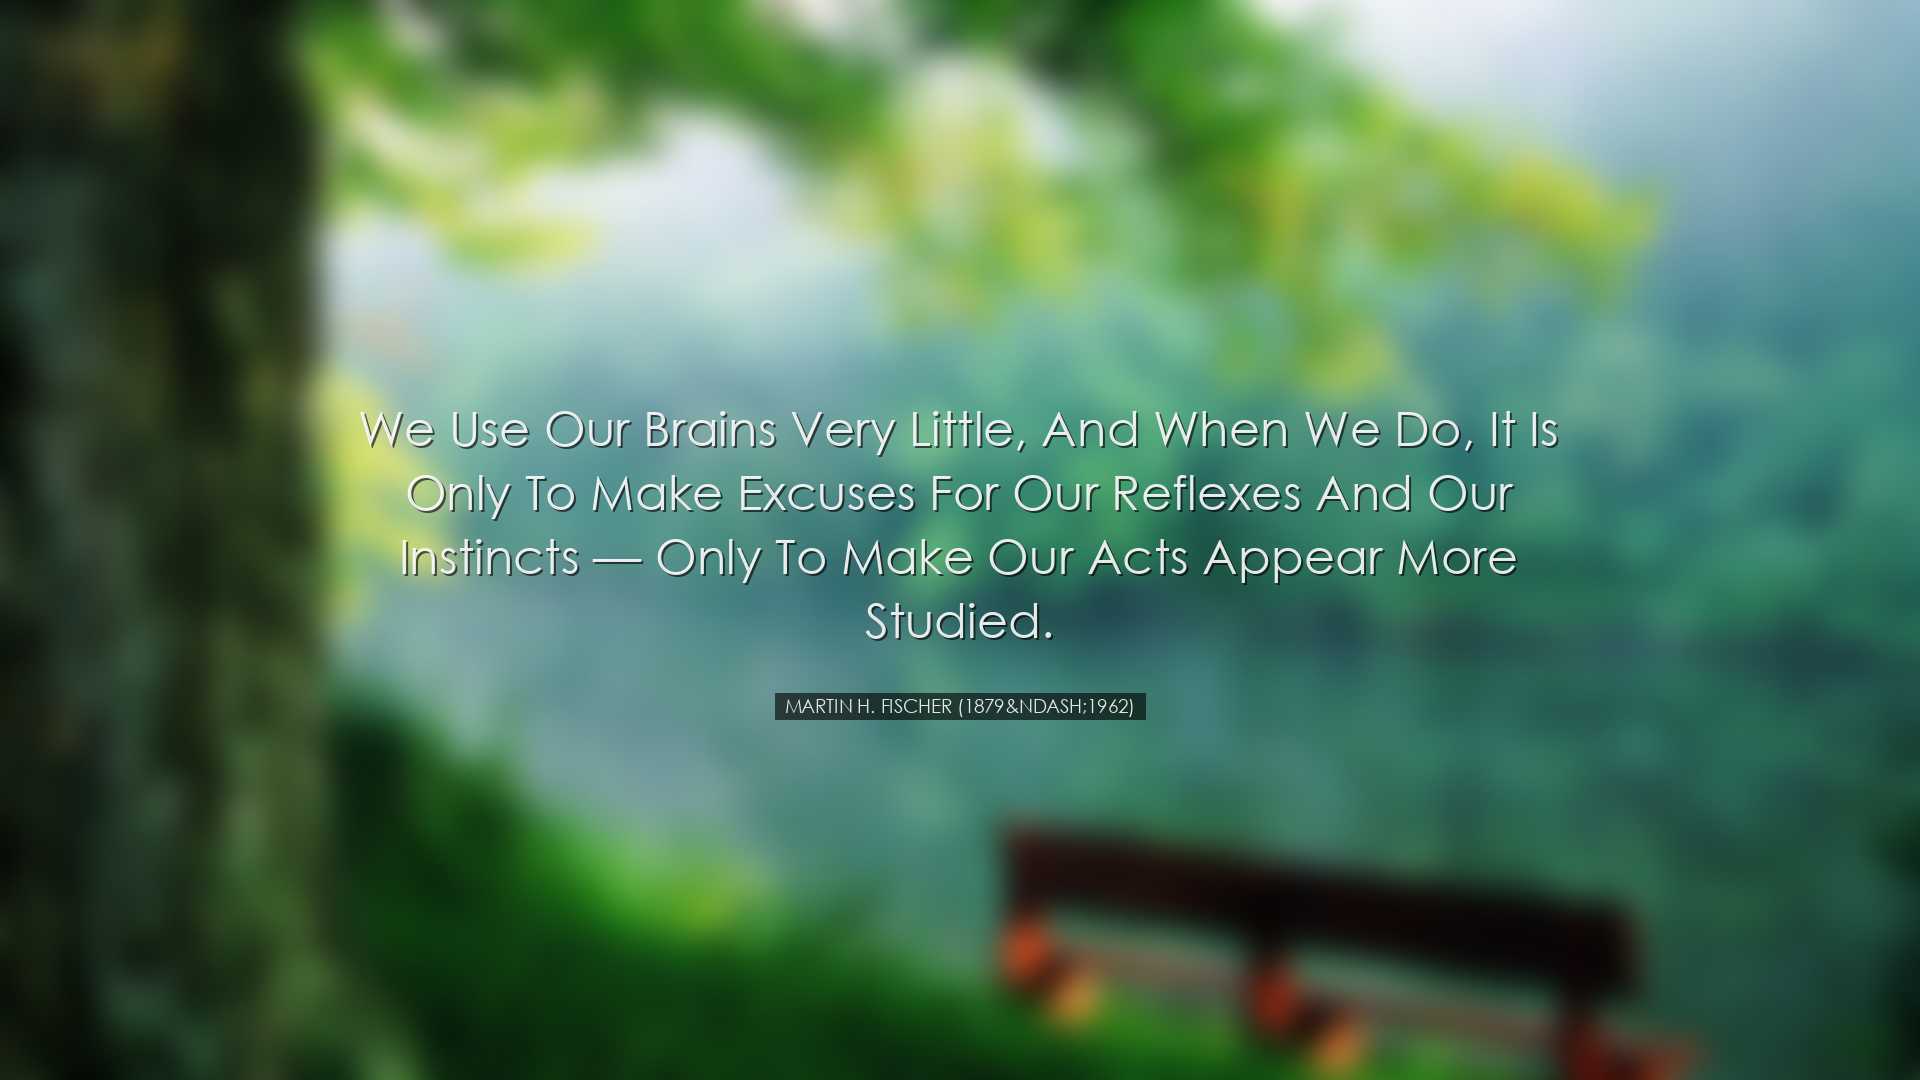 We use our brains very little, and when we do, it is only to make